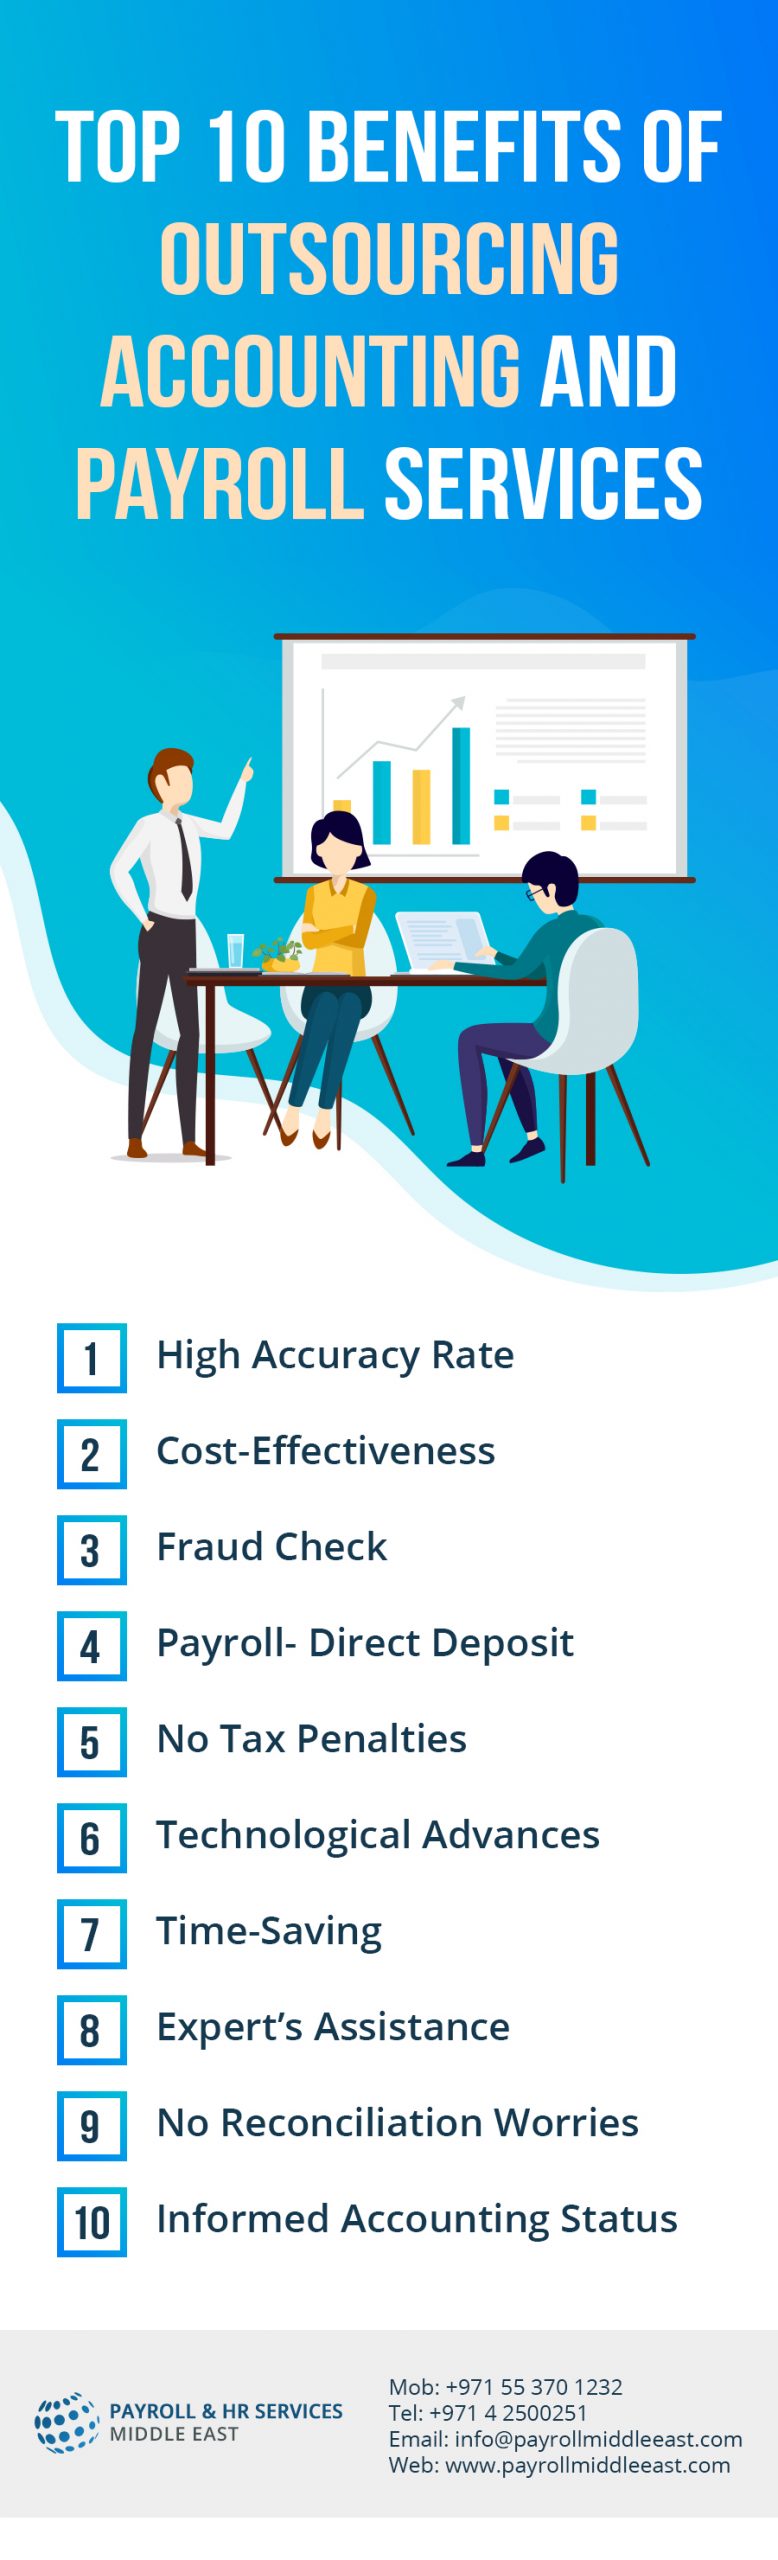 Top-10-Benefits-of-Outsourcing-Accounting-and-Payroll-Services